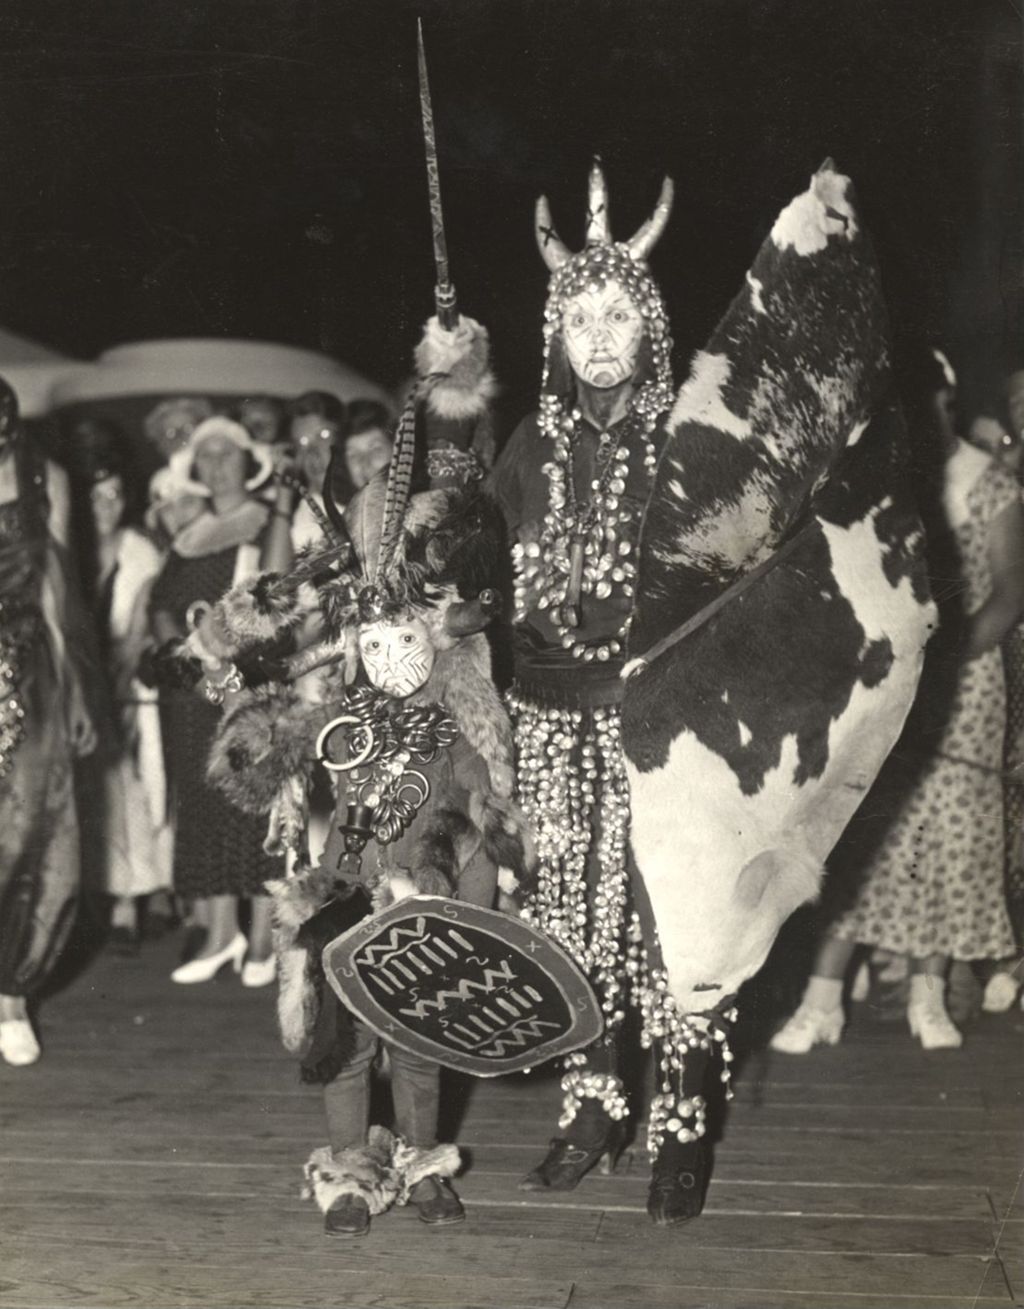 Miniature of Two of the contestants who entered in the 'Parade of the Masques' contest